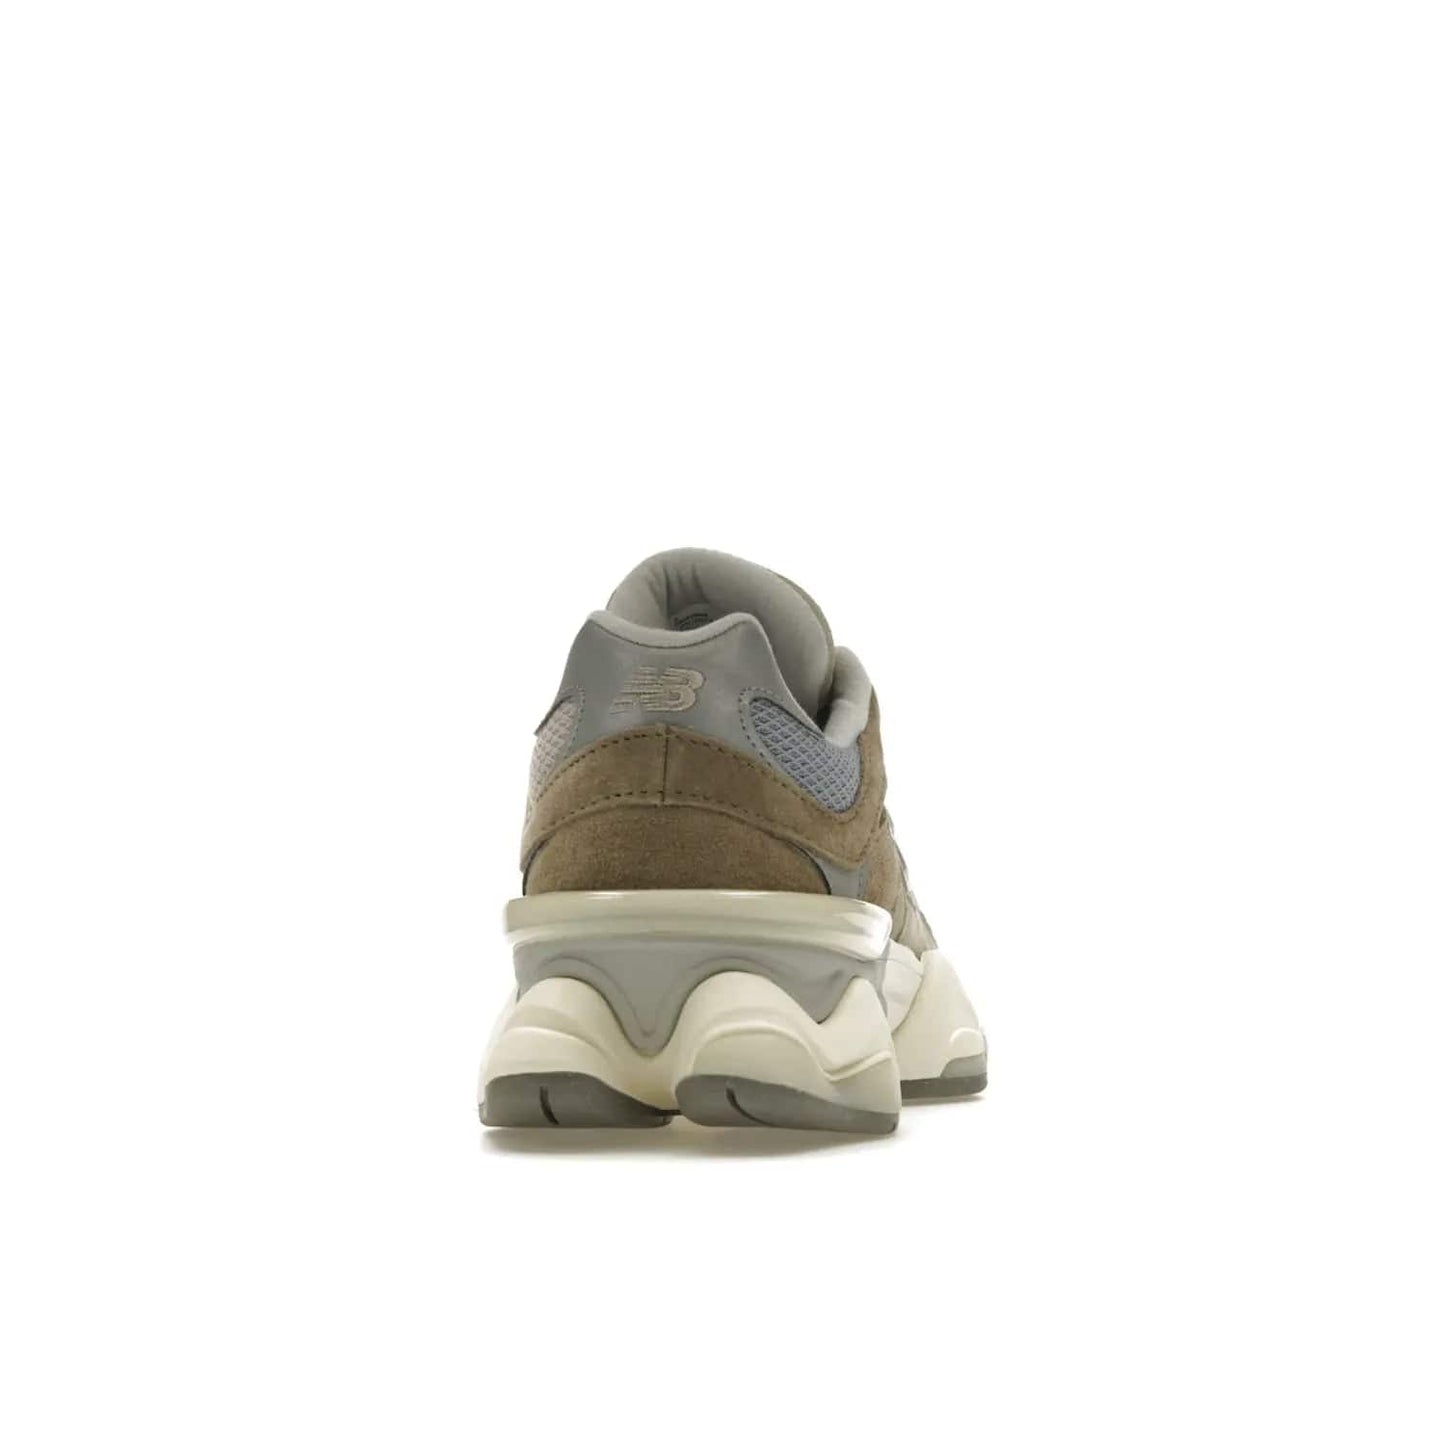 New Balance 9060 Mushroom - Image 29 - Only at www.BallersClubKickz.com - Get the New Balance 9060 Mushroom in stylish aluminum and mushroom tones. Featuring a porous mesh fabric with multiple suede overlays, a grey N symbol and rugged off-white/grey sole. Shop now and make a statement.